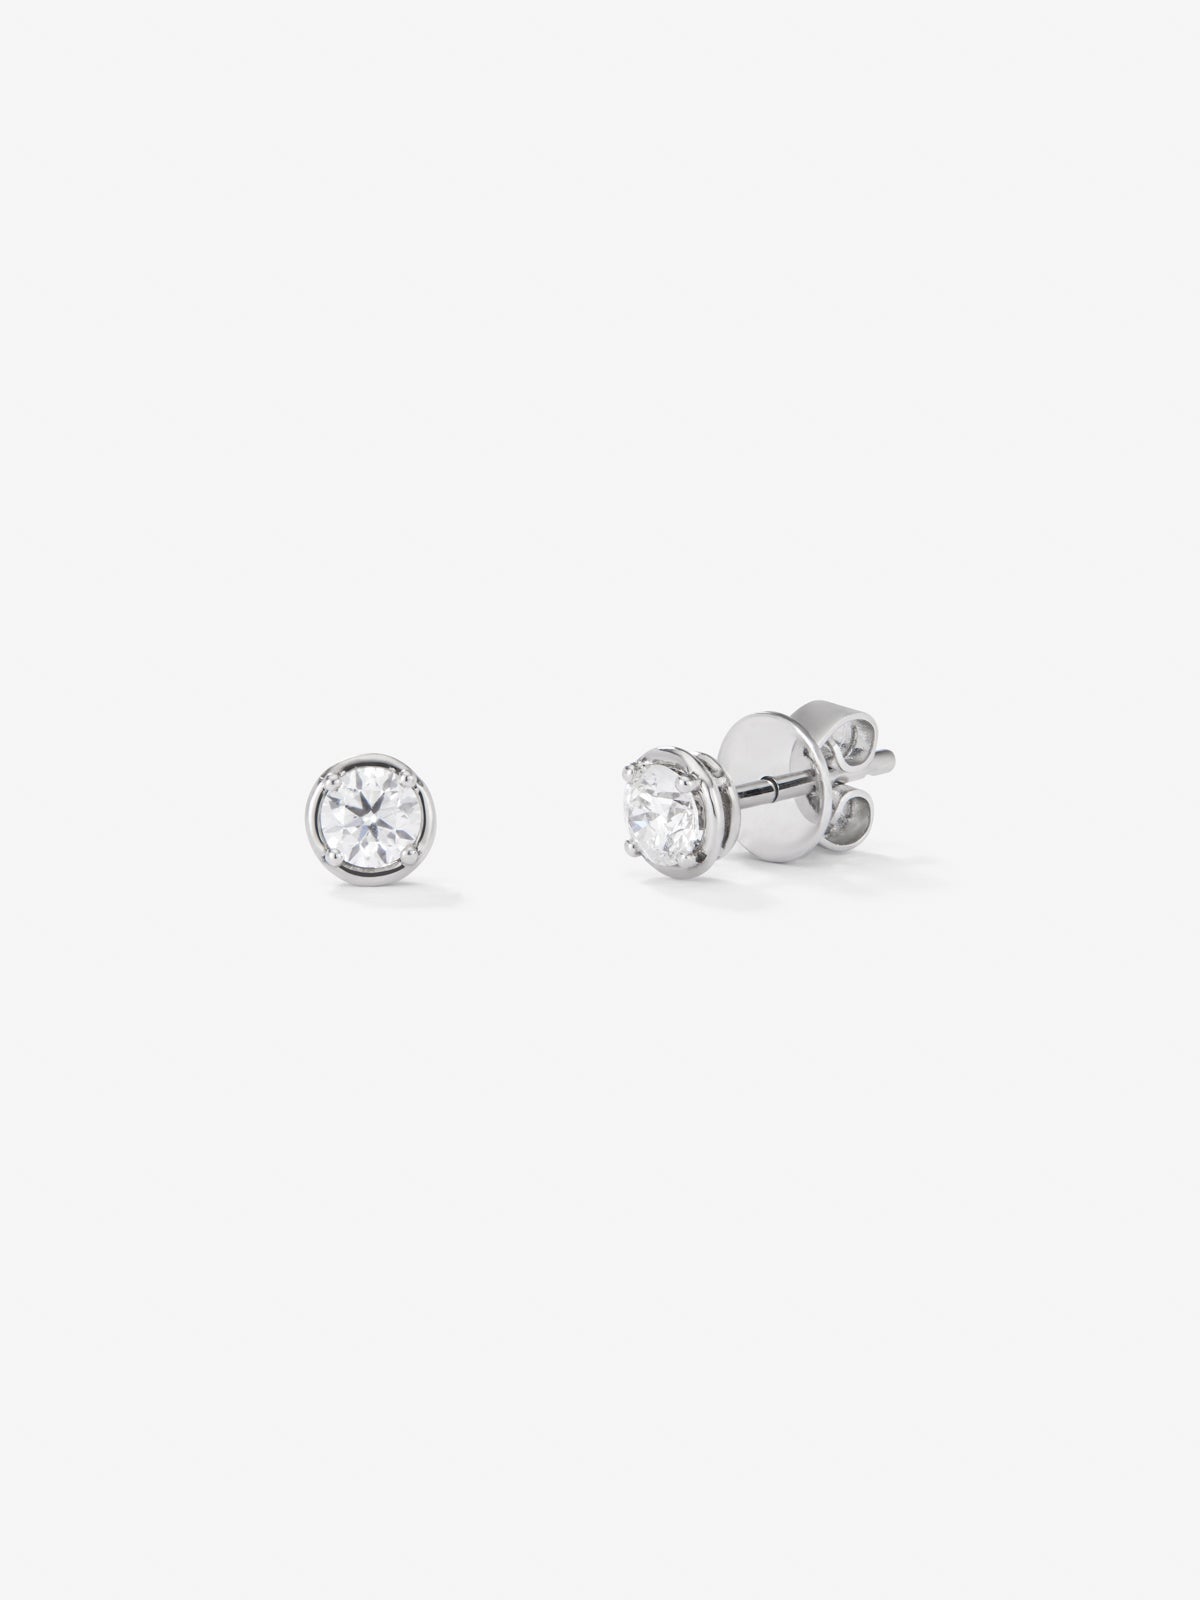 18K white gold earrings with brilliant cut diamonds with a total of 0.5 cts